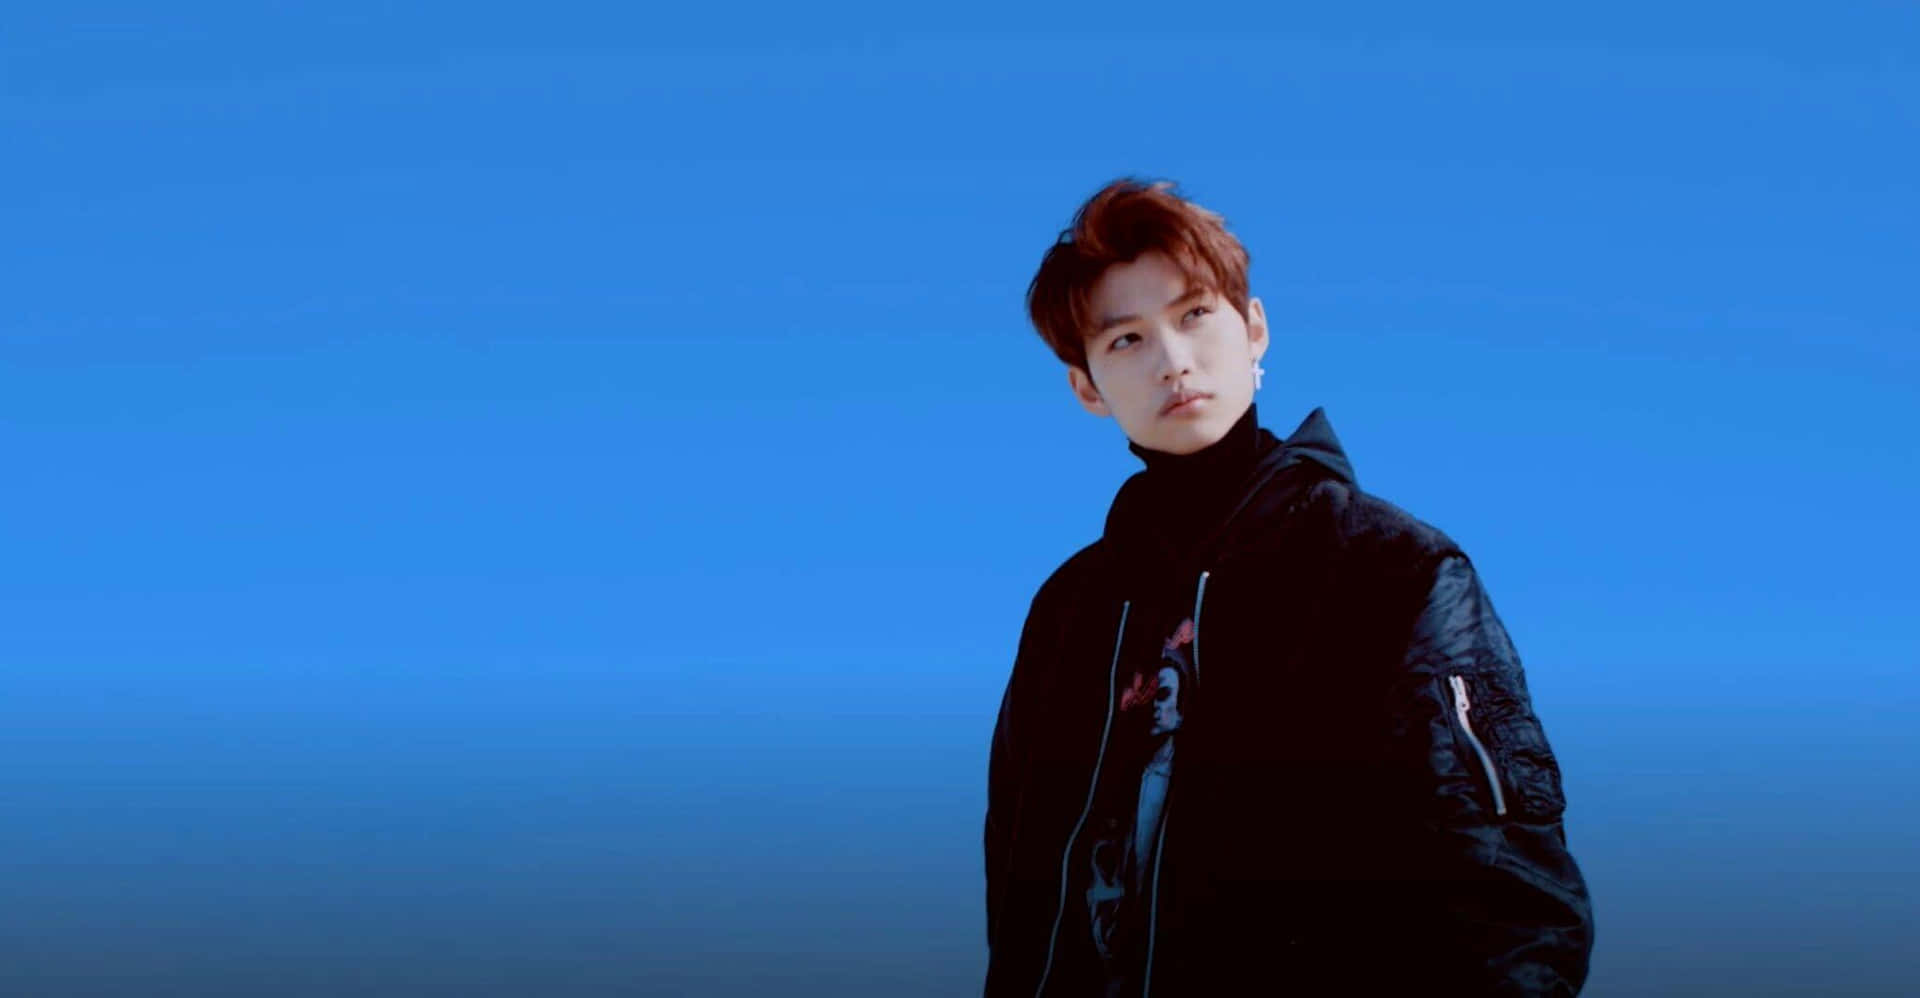 A Man In A Black Jacket Standing In Front Of A Blue Sky Wallpaper